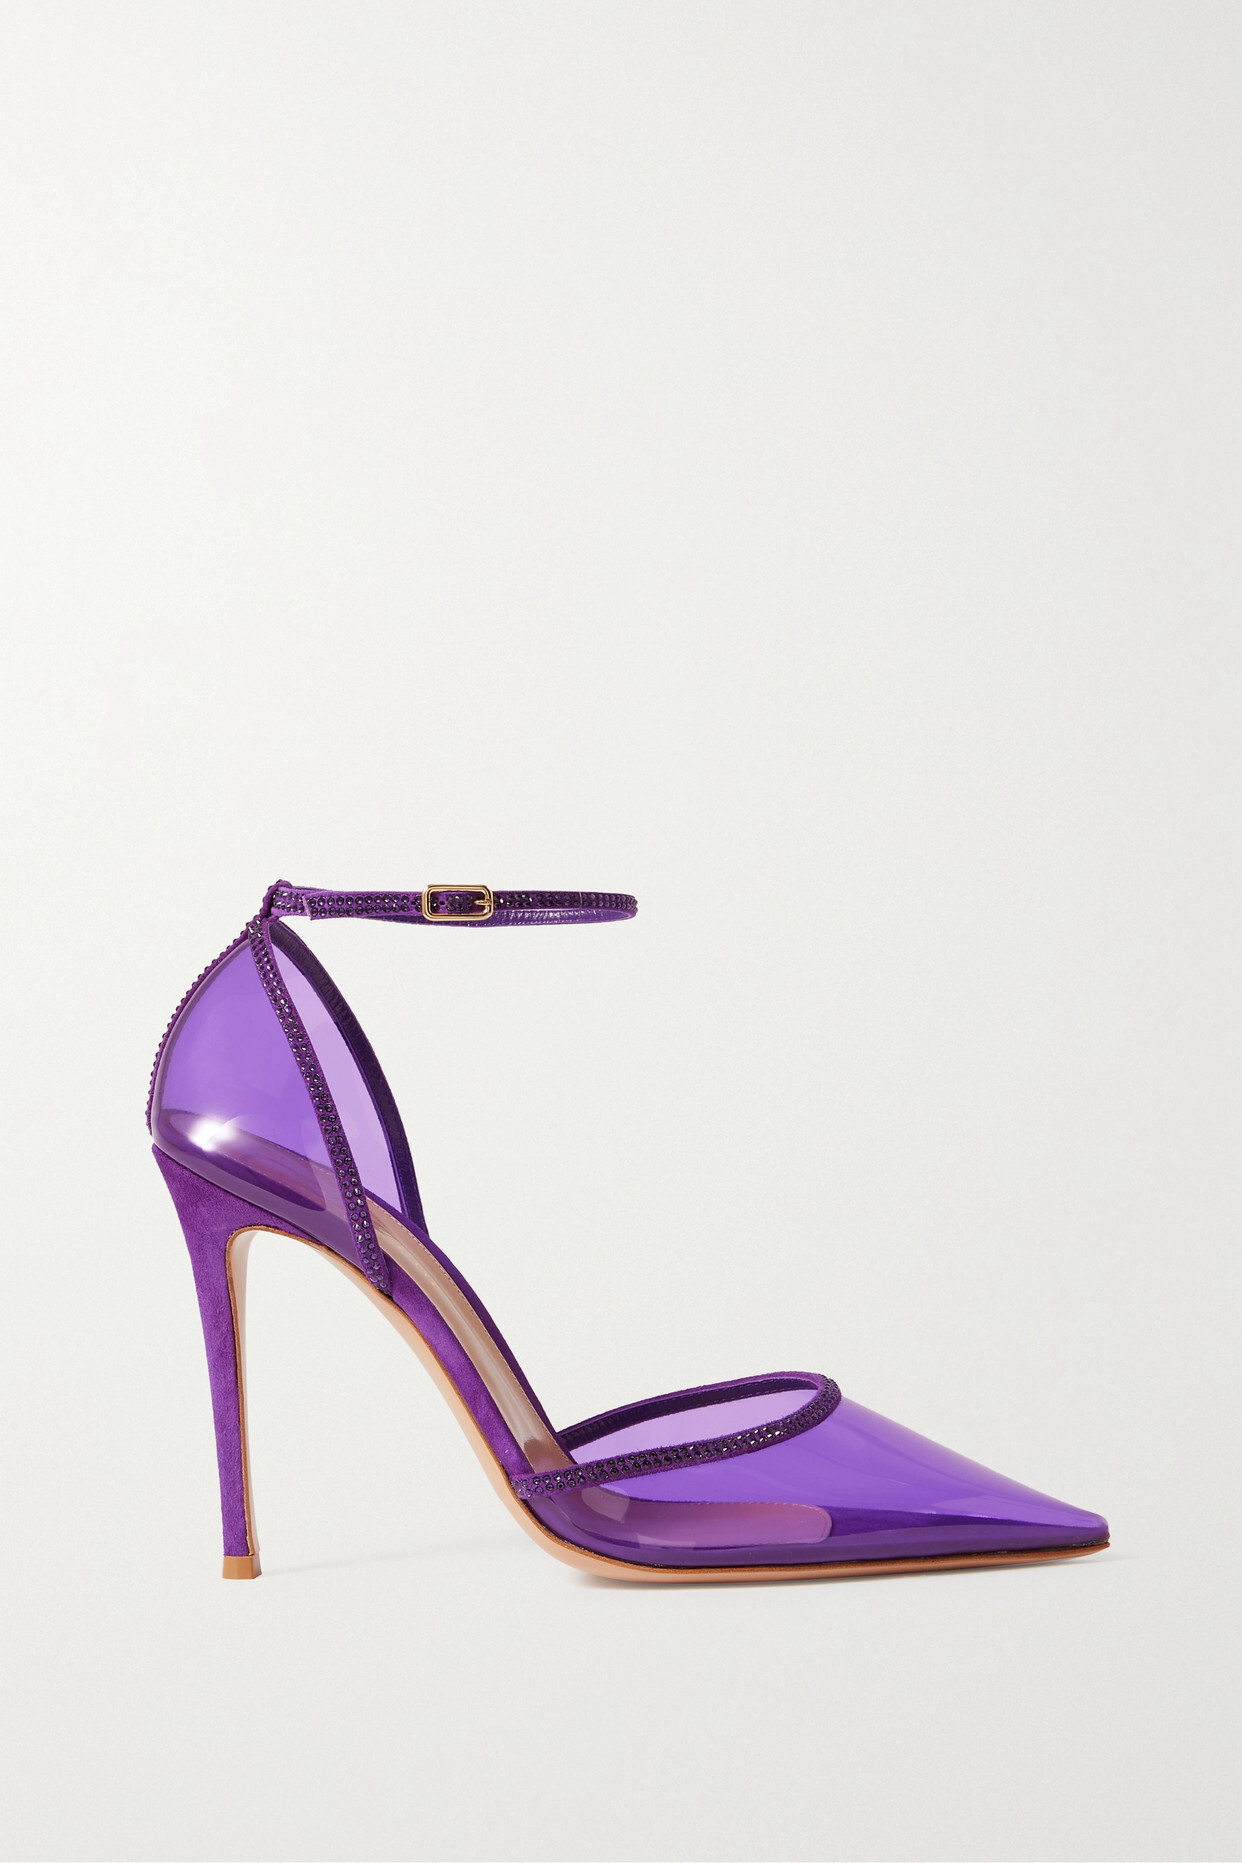 Gianvito Rossi - 105 Crystal-embellished Suede-trimmed Pvc Pumps - Purple